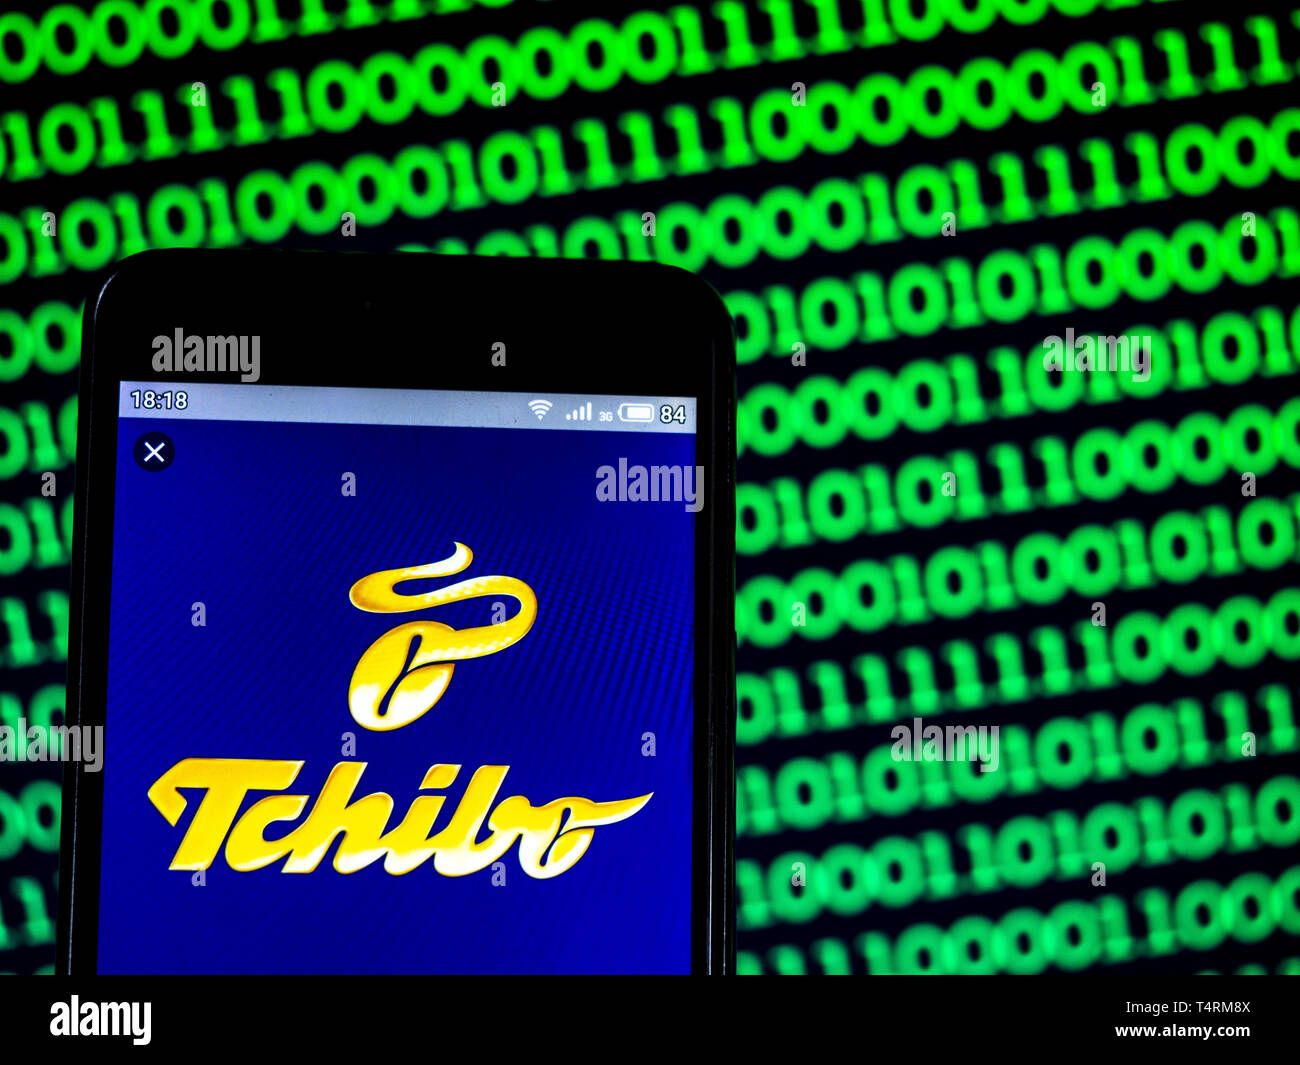 Page 2 - Tchibo High Resolution Stock Photography and Images - Alamy